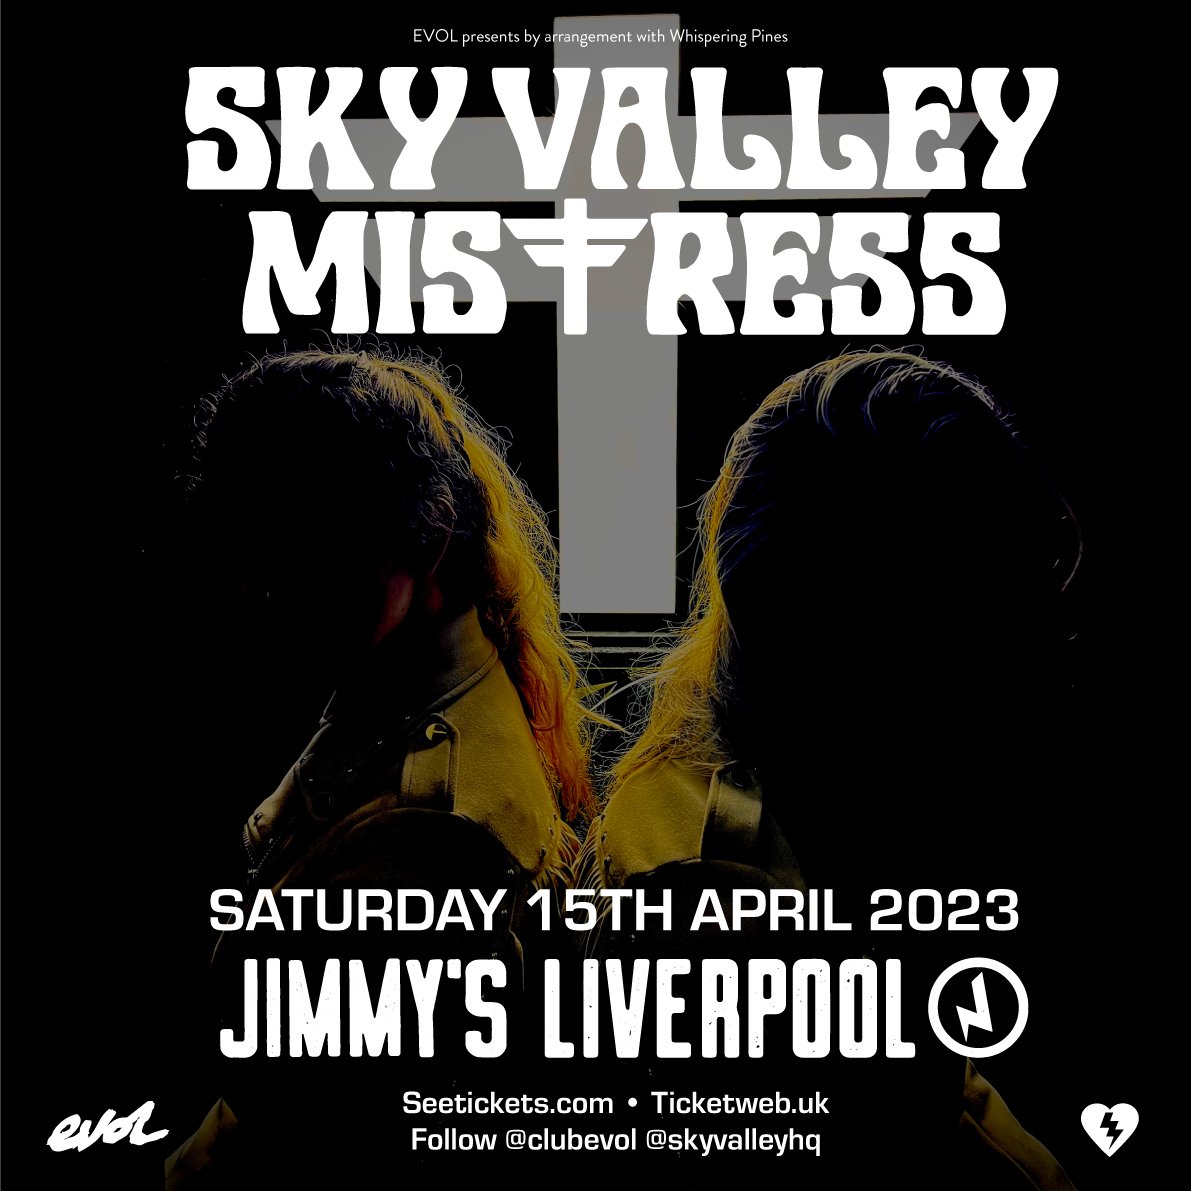 ***ANNOUNCEMENT*** Making their much anticipated return, Blackburn rockers SKY VALLEY MISTRESS (@SkyValleyHQ) take to the @JimmysLiverpool stage as part of The Celestial Comedown tour, Saturday April 15th. Tickets on-sale now @seetickets: seetickets.com/tour/sky-valle…